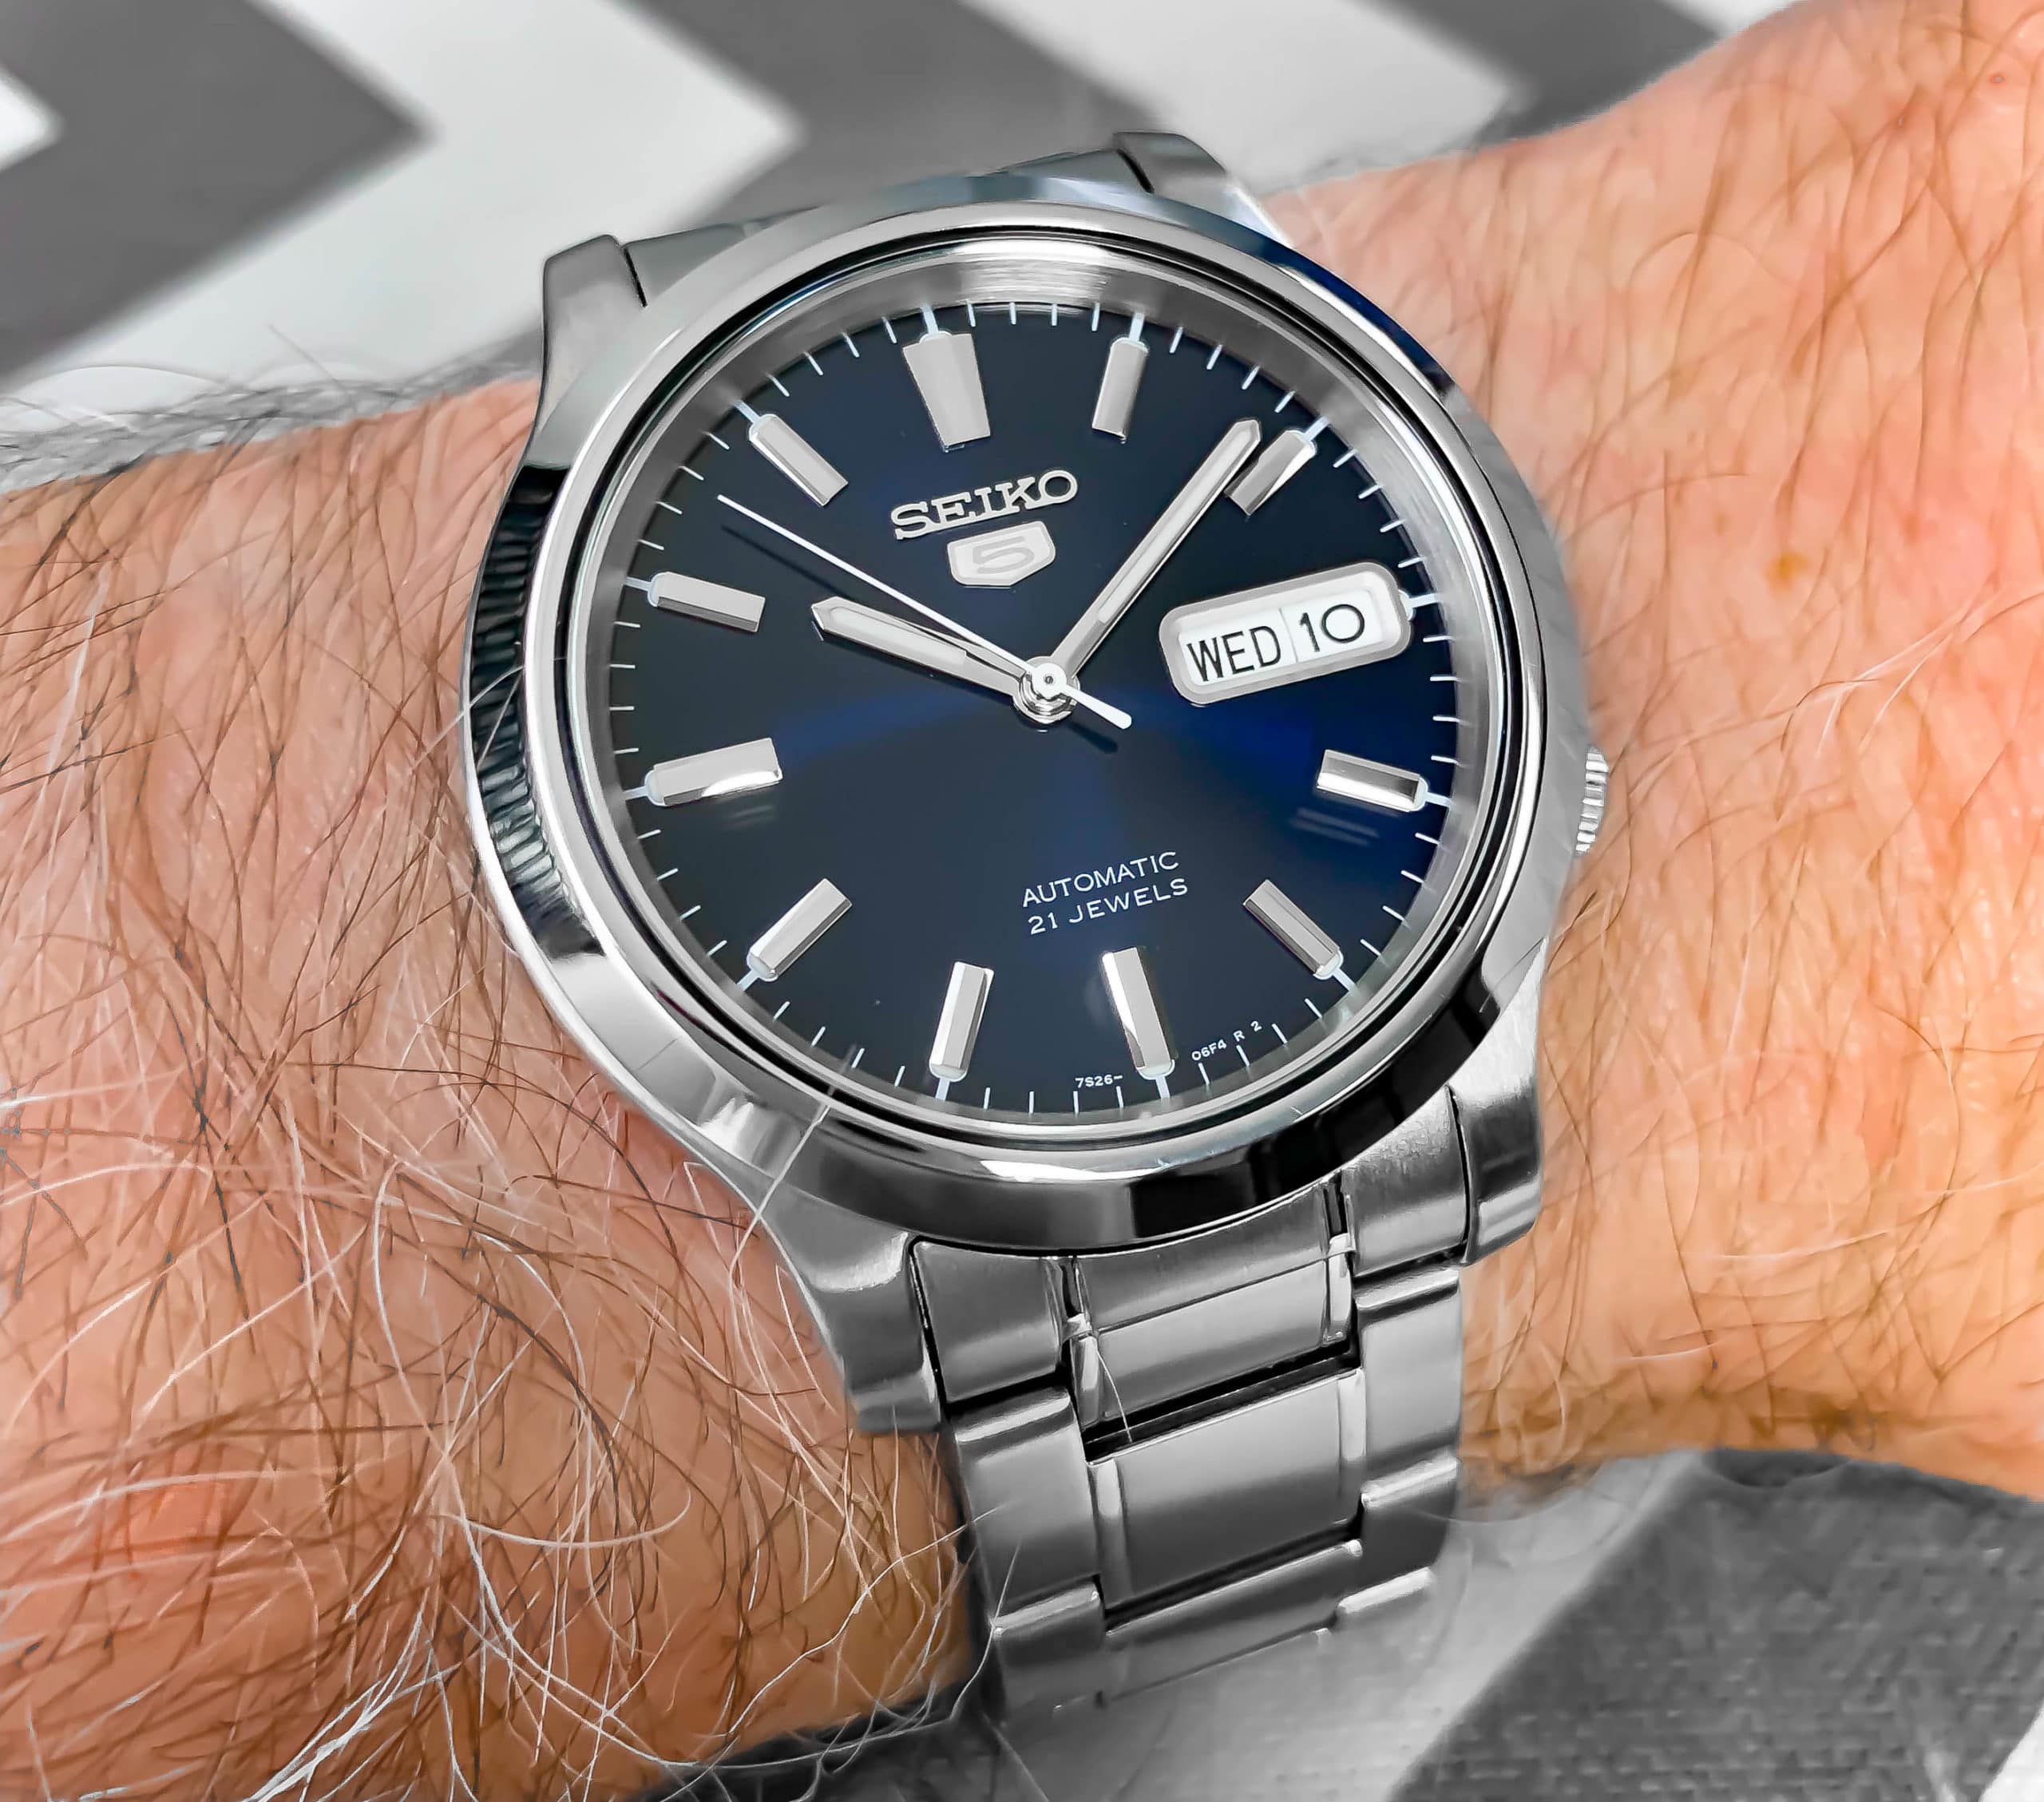 Seiko 5 SNK793 Review: It Casual and Classy in Blue